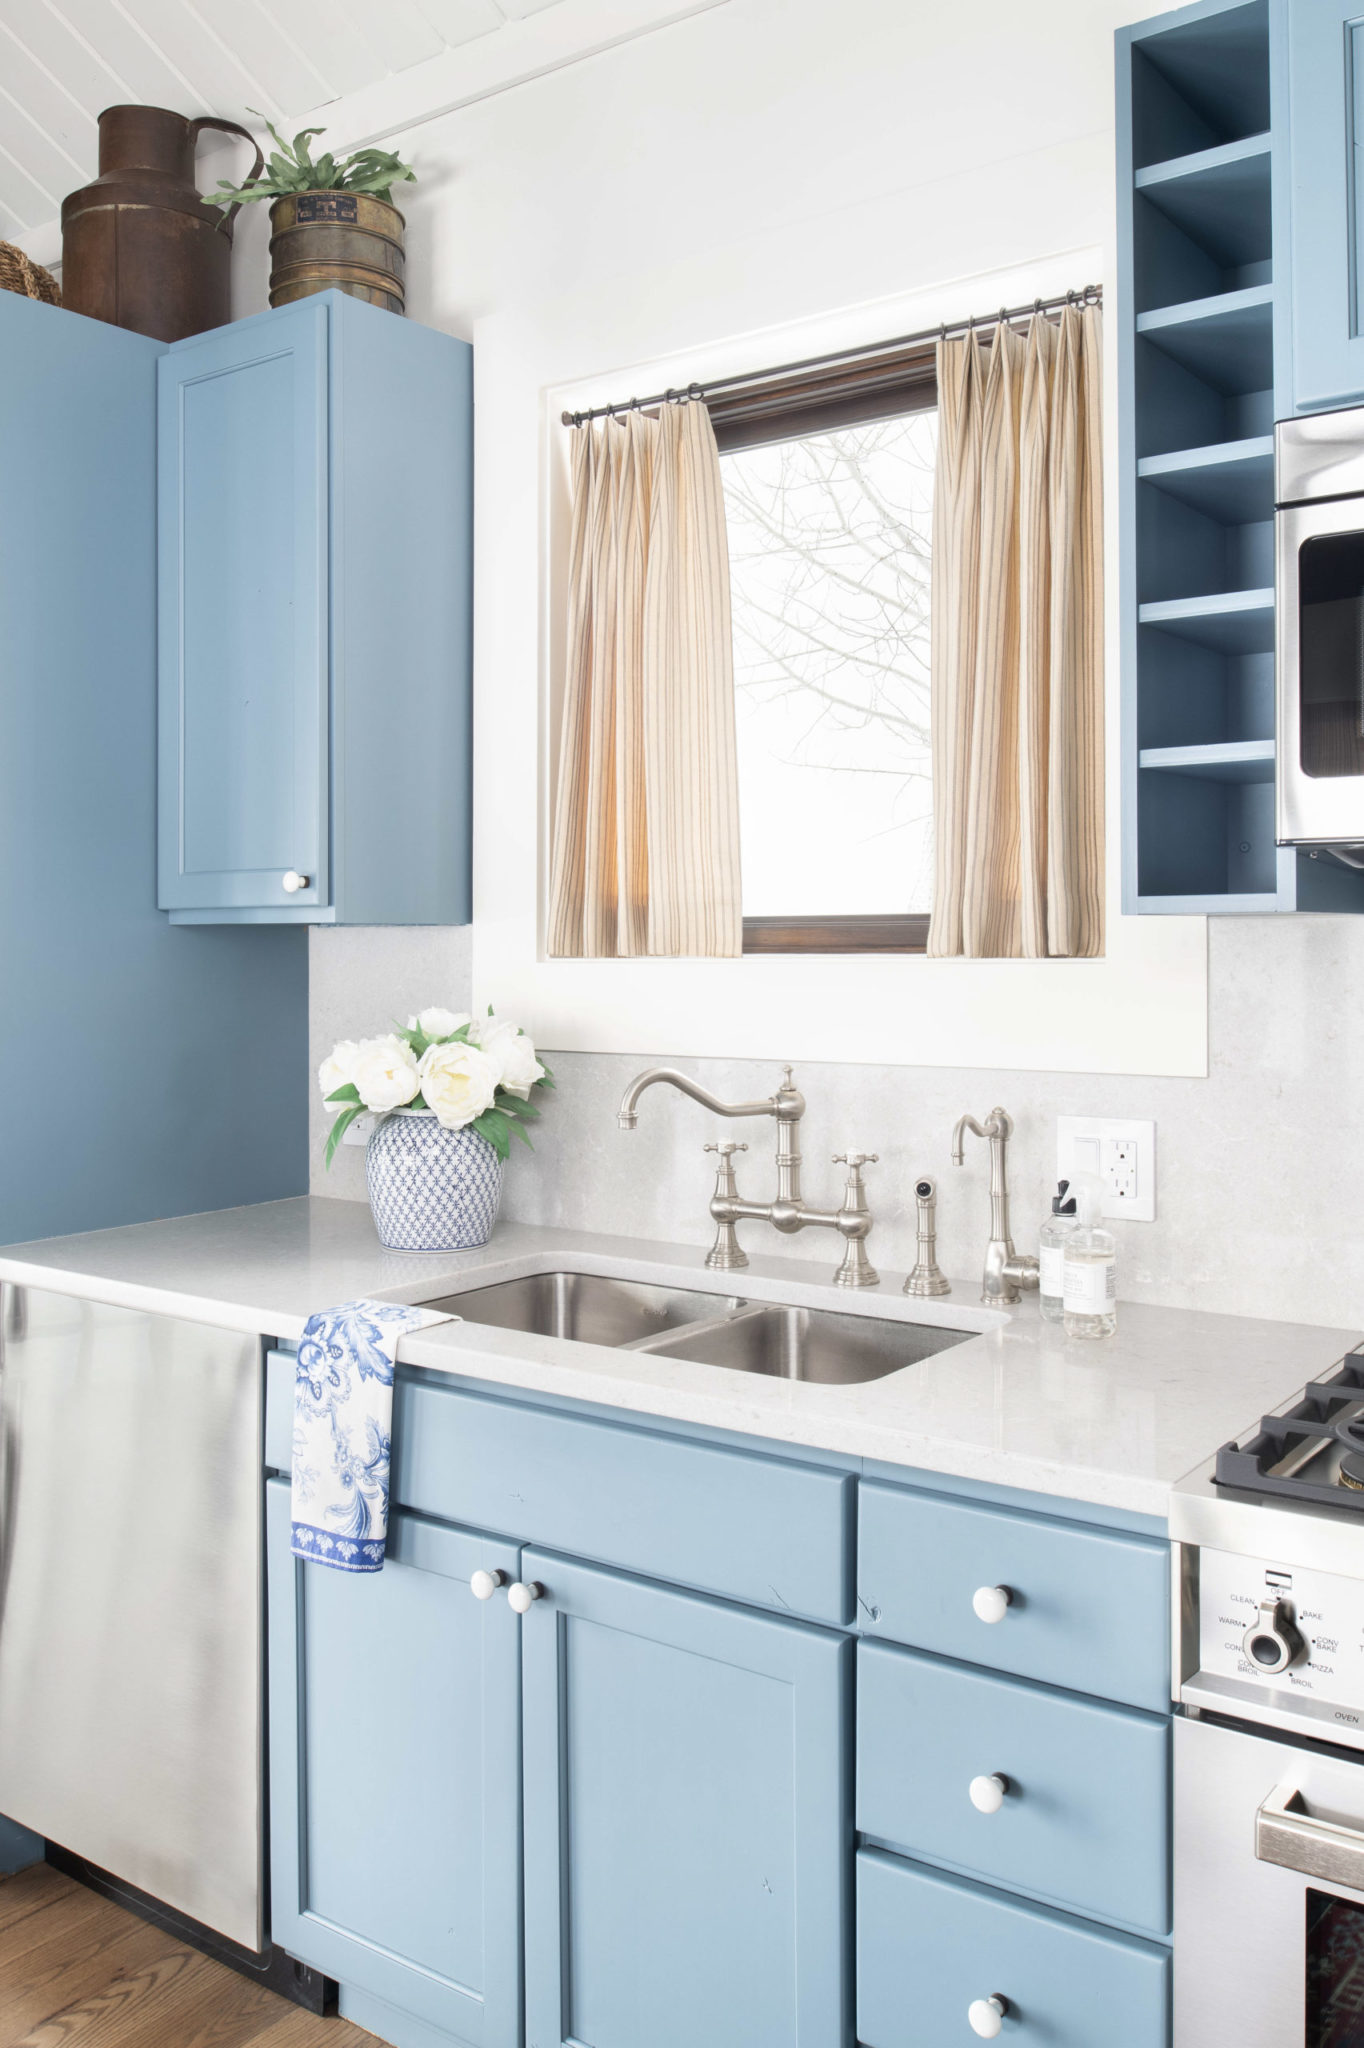 Sky blue kitchen cabinets with white walls and tan curtains